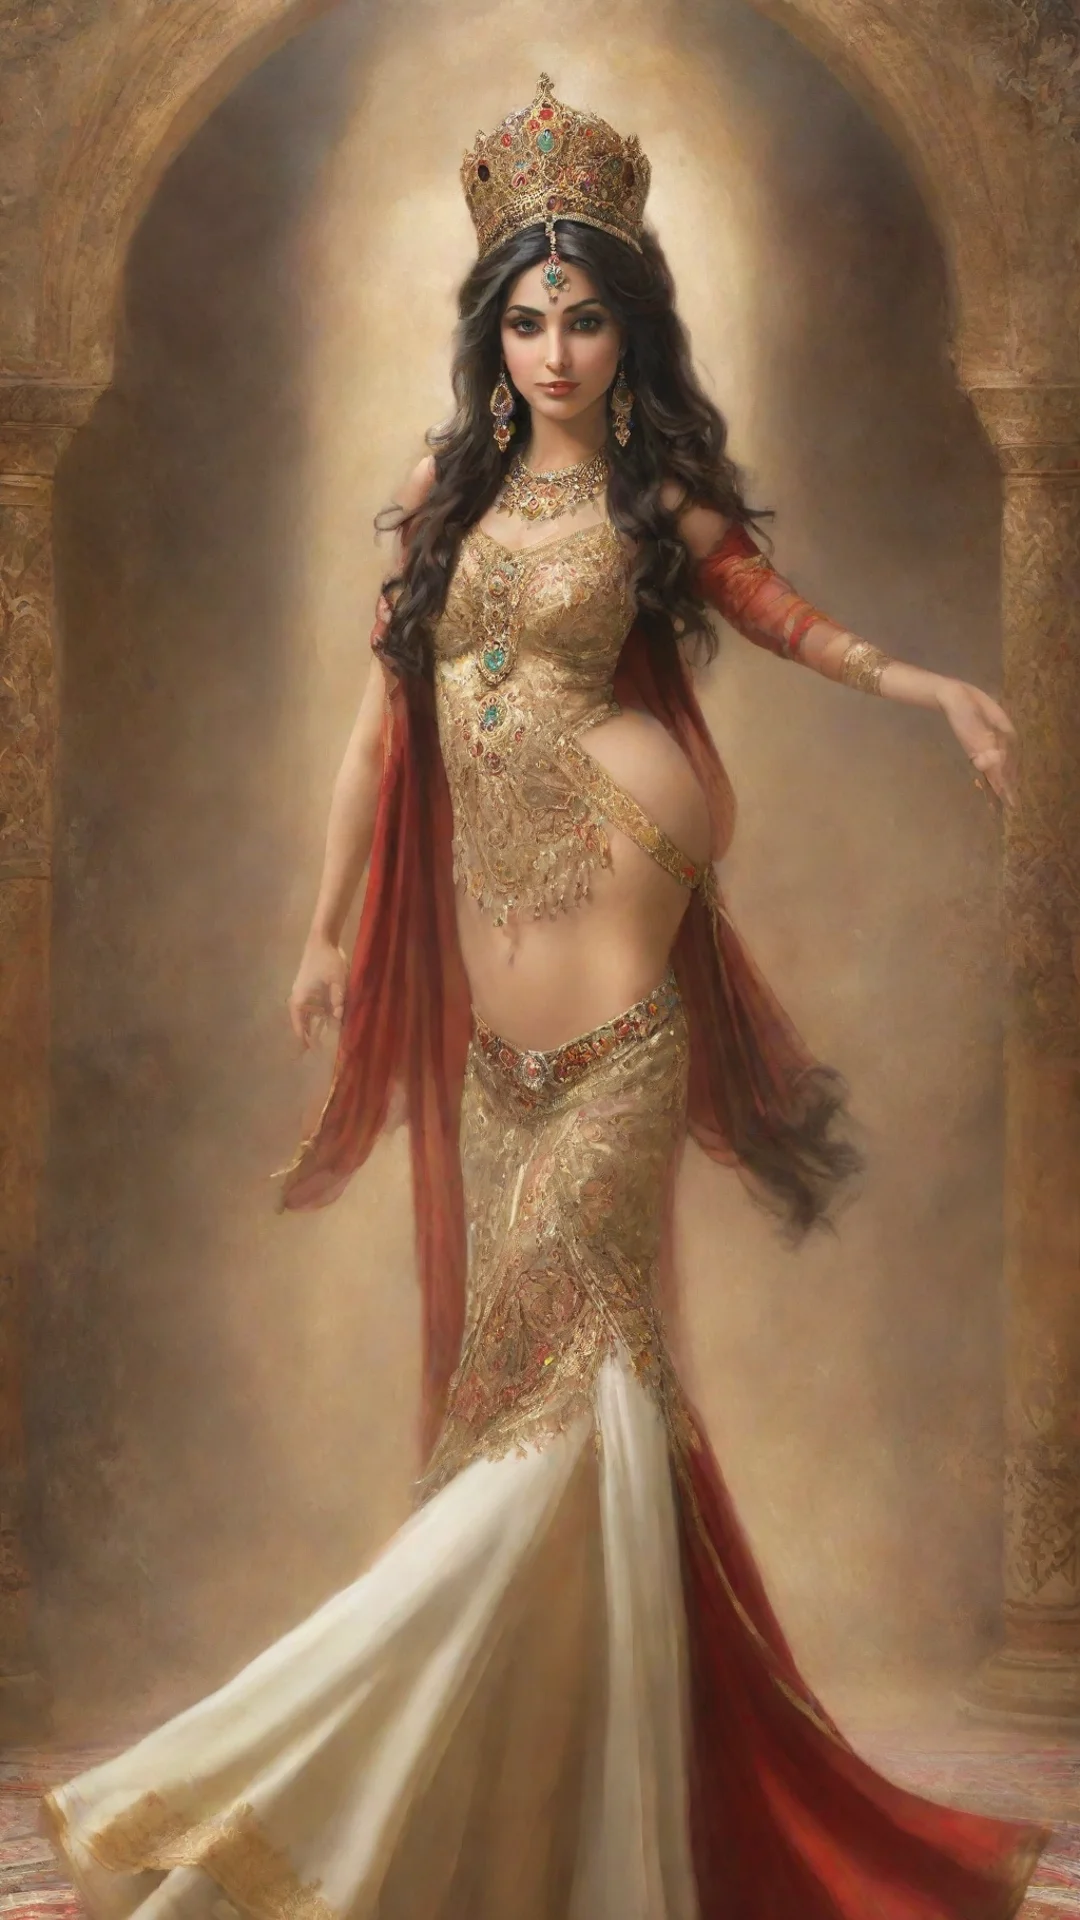 aiamazing dancing persian queen awesome portrait 2 tall